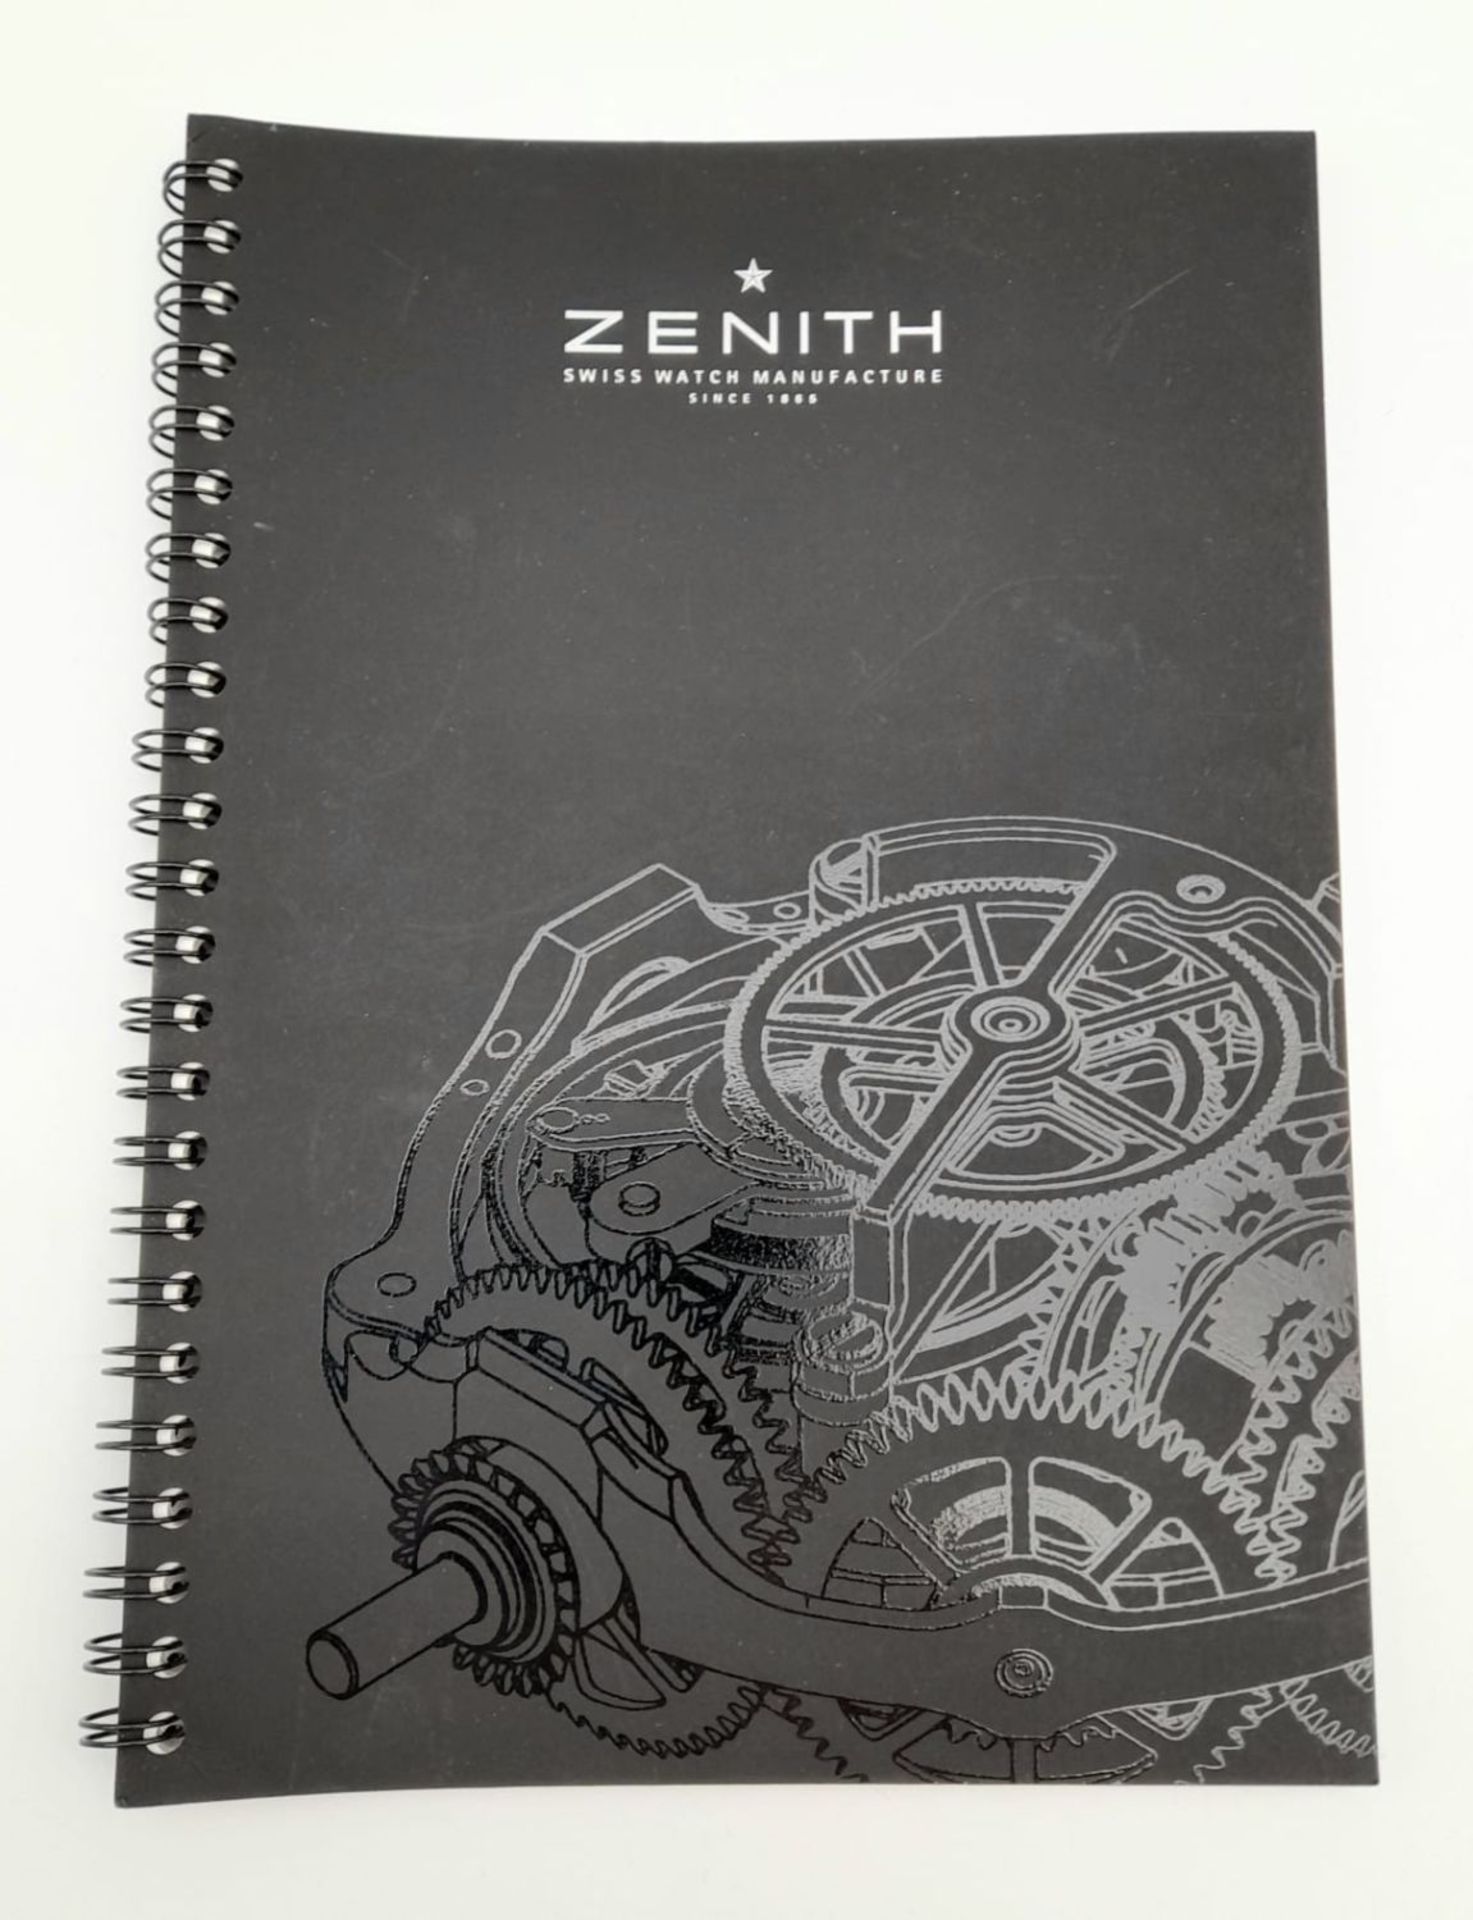 COLLECTION OF 2X ZENITH WATCH COMPANY NOTEBOOKS WITH A ZENITH BOOKMARK - Image 9 of 16